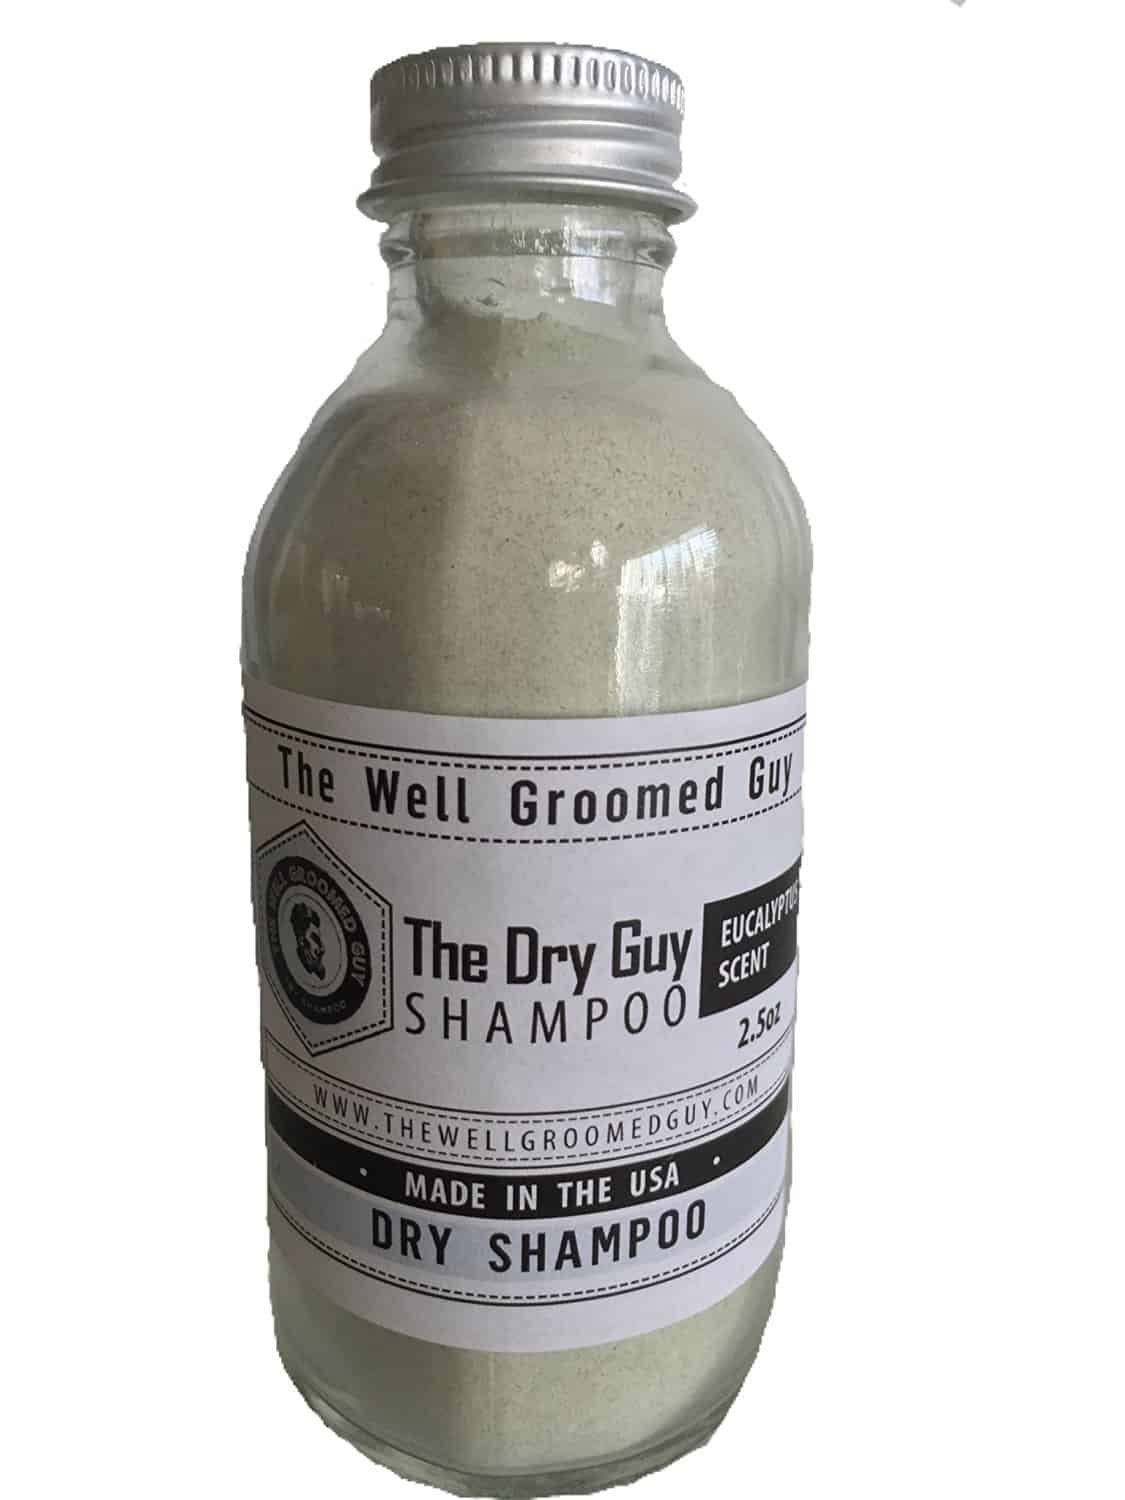 A close up of a bottle of dry shampoo